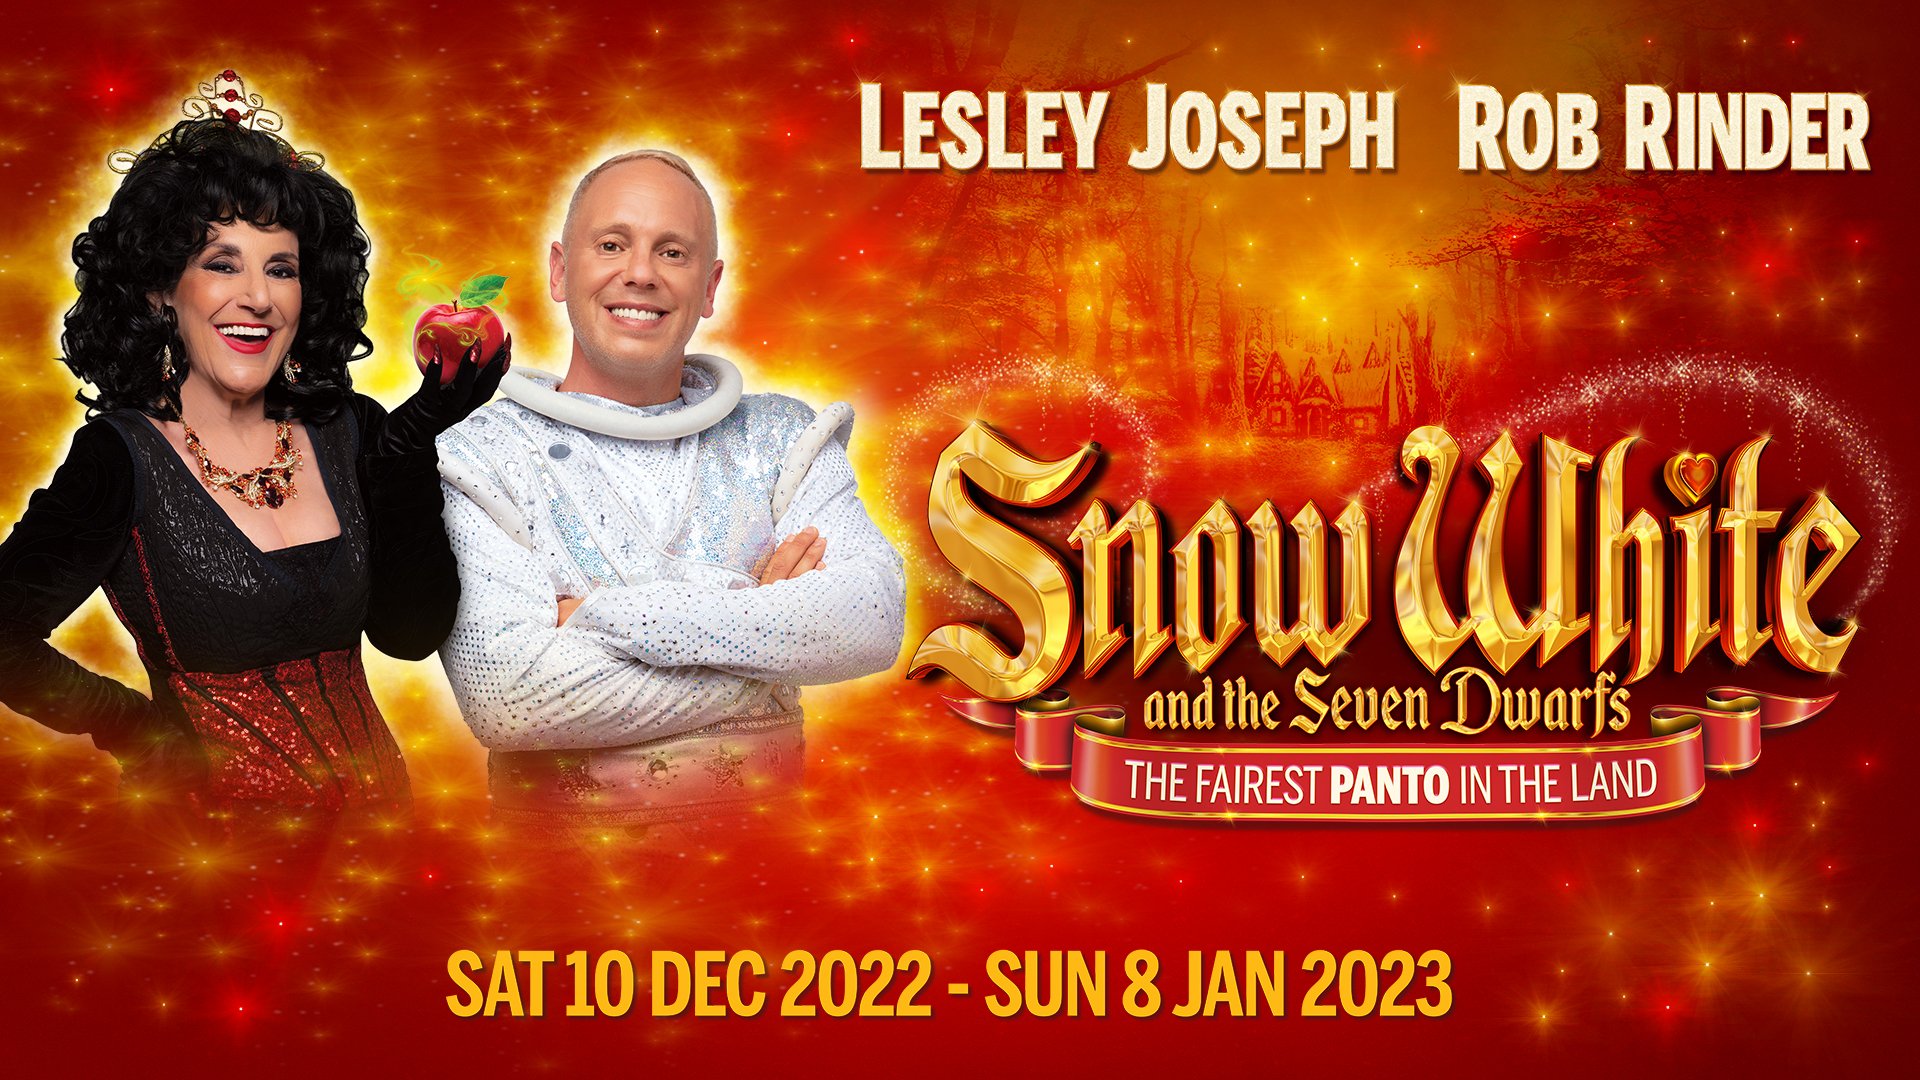 Lesley Joseph and Rob Rinder to star in pantomime at MK Theatre